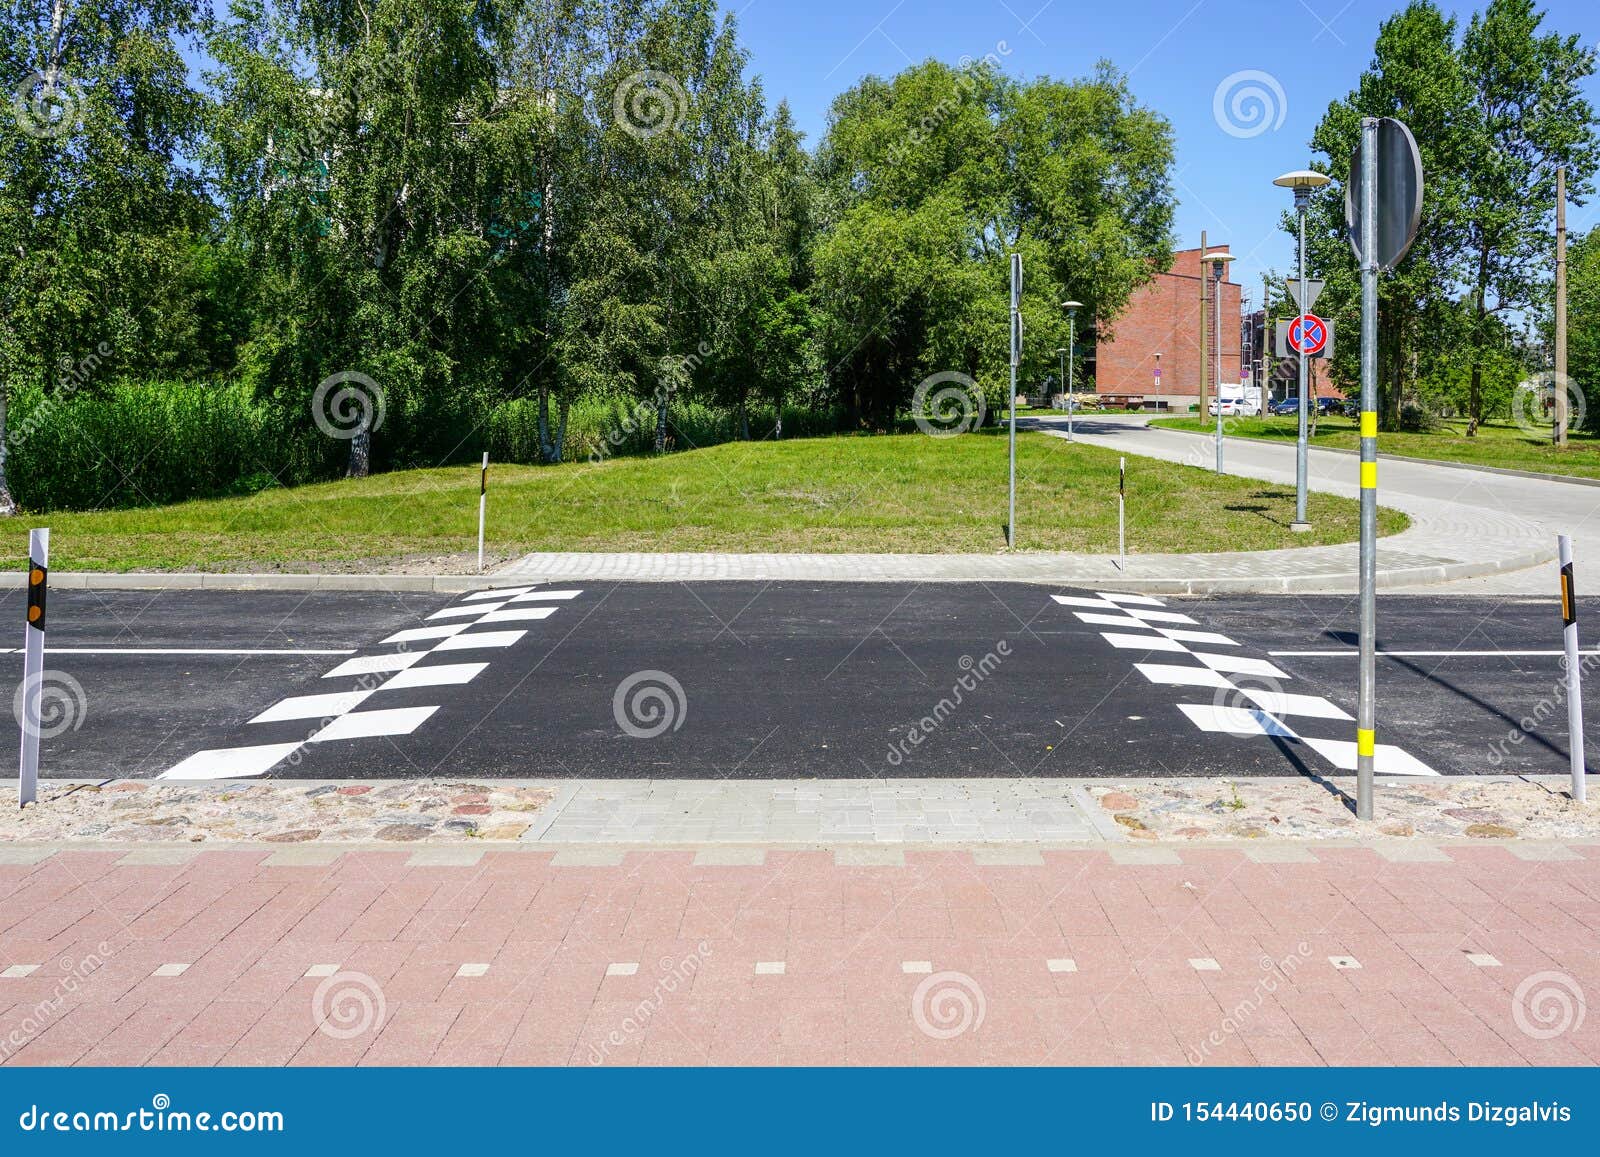 New Traffic Safety Speed Bump on an Asphalt Road Stock Photo - Image of ...